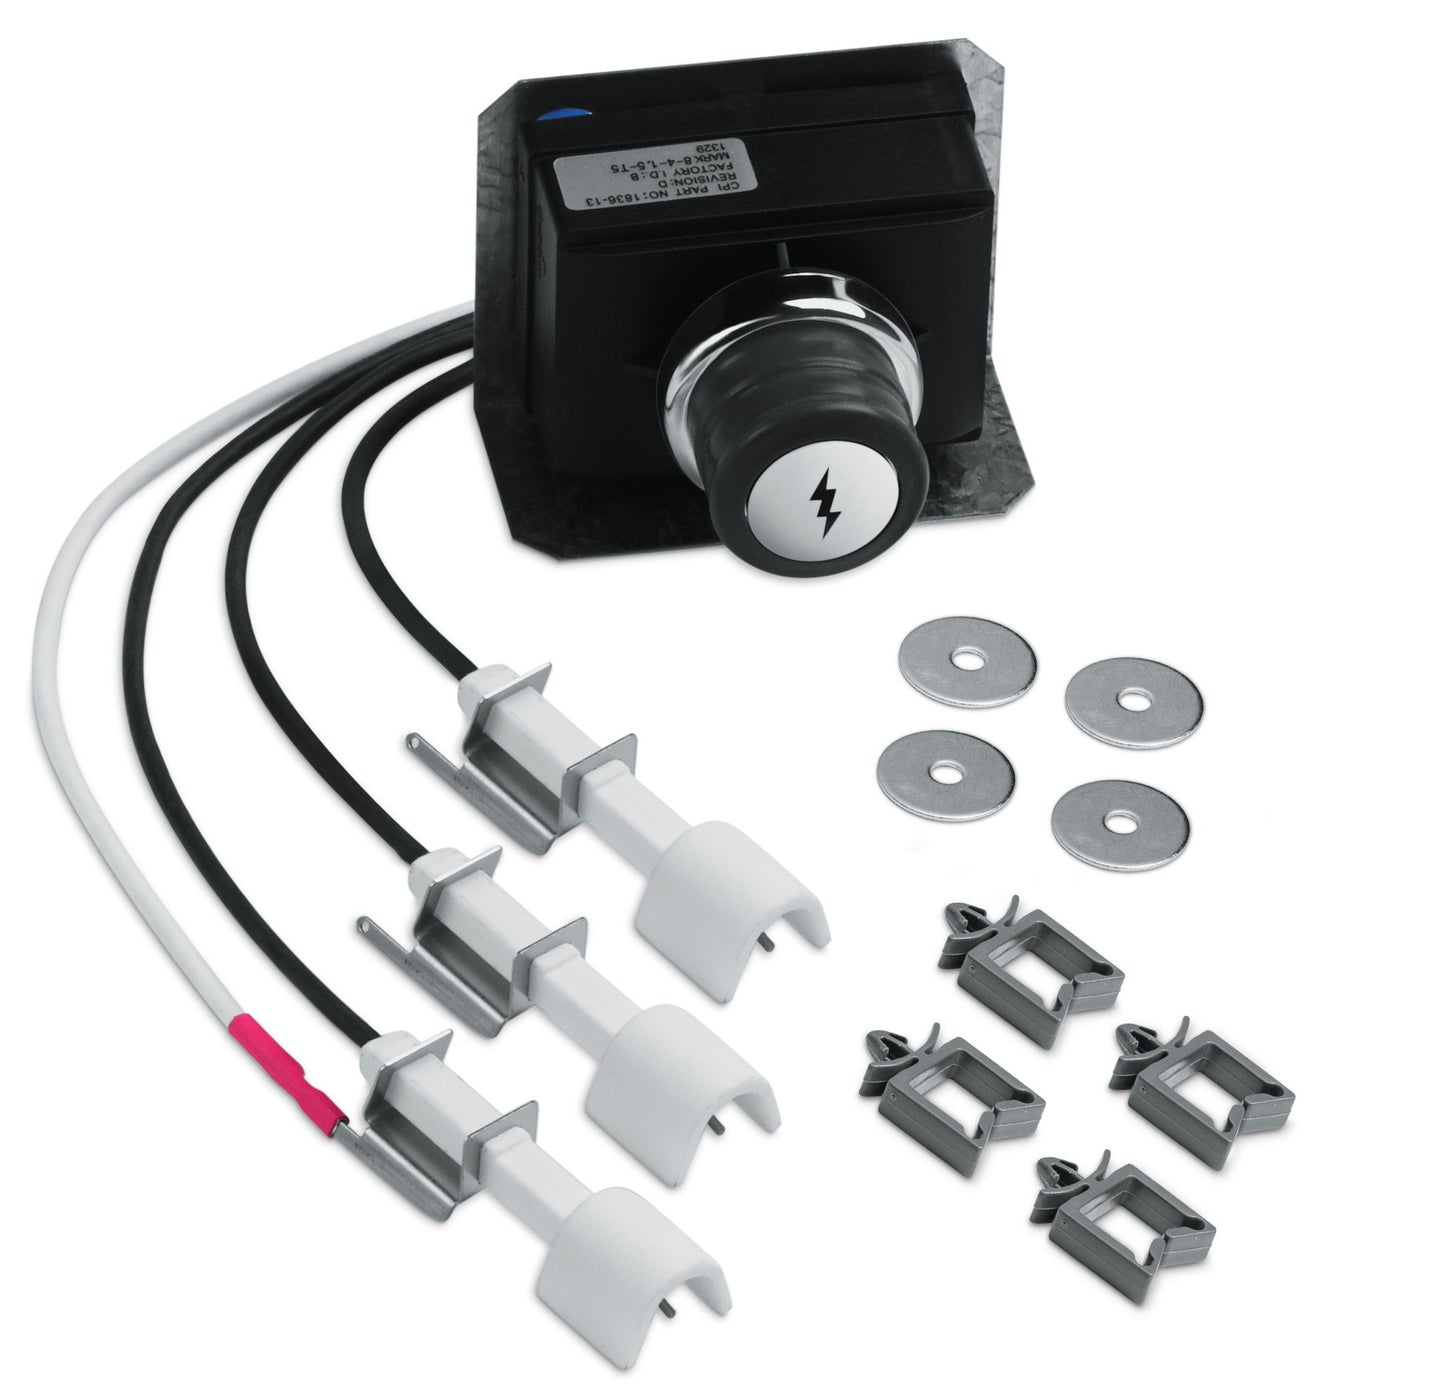 Weber 7628 Replacement Ignitor Kit | Perfect for getting that spark back in your grilling life. Stop by in-store or purchase online with Barbecues Galore. Located in Burlington, Oakville, Etobicoke & Calgary. Shop here for all of your Bbq, patio, accessory and parts needs.